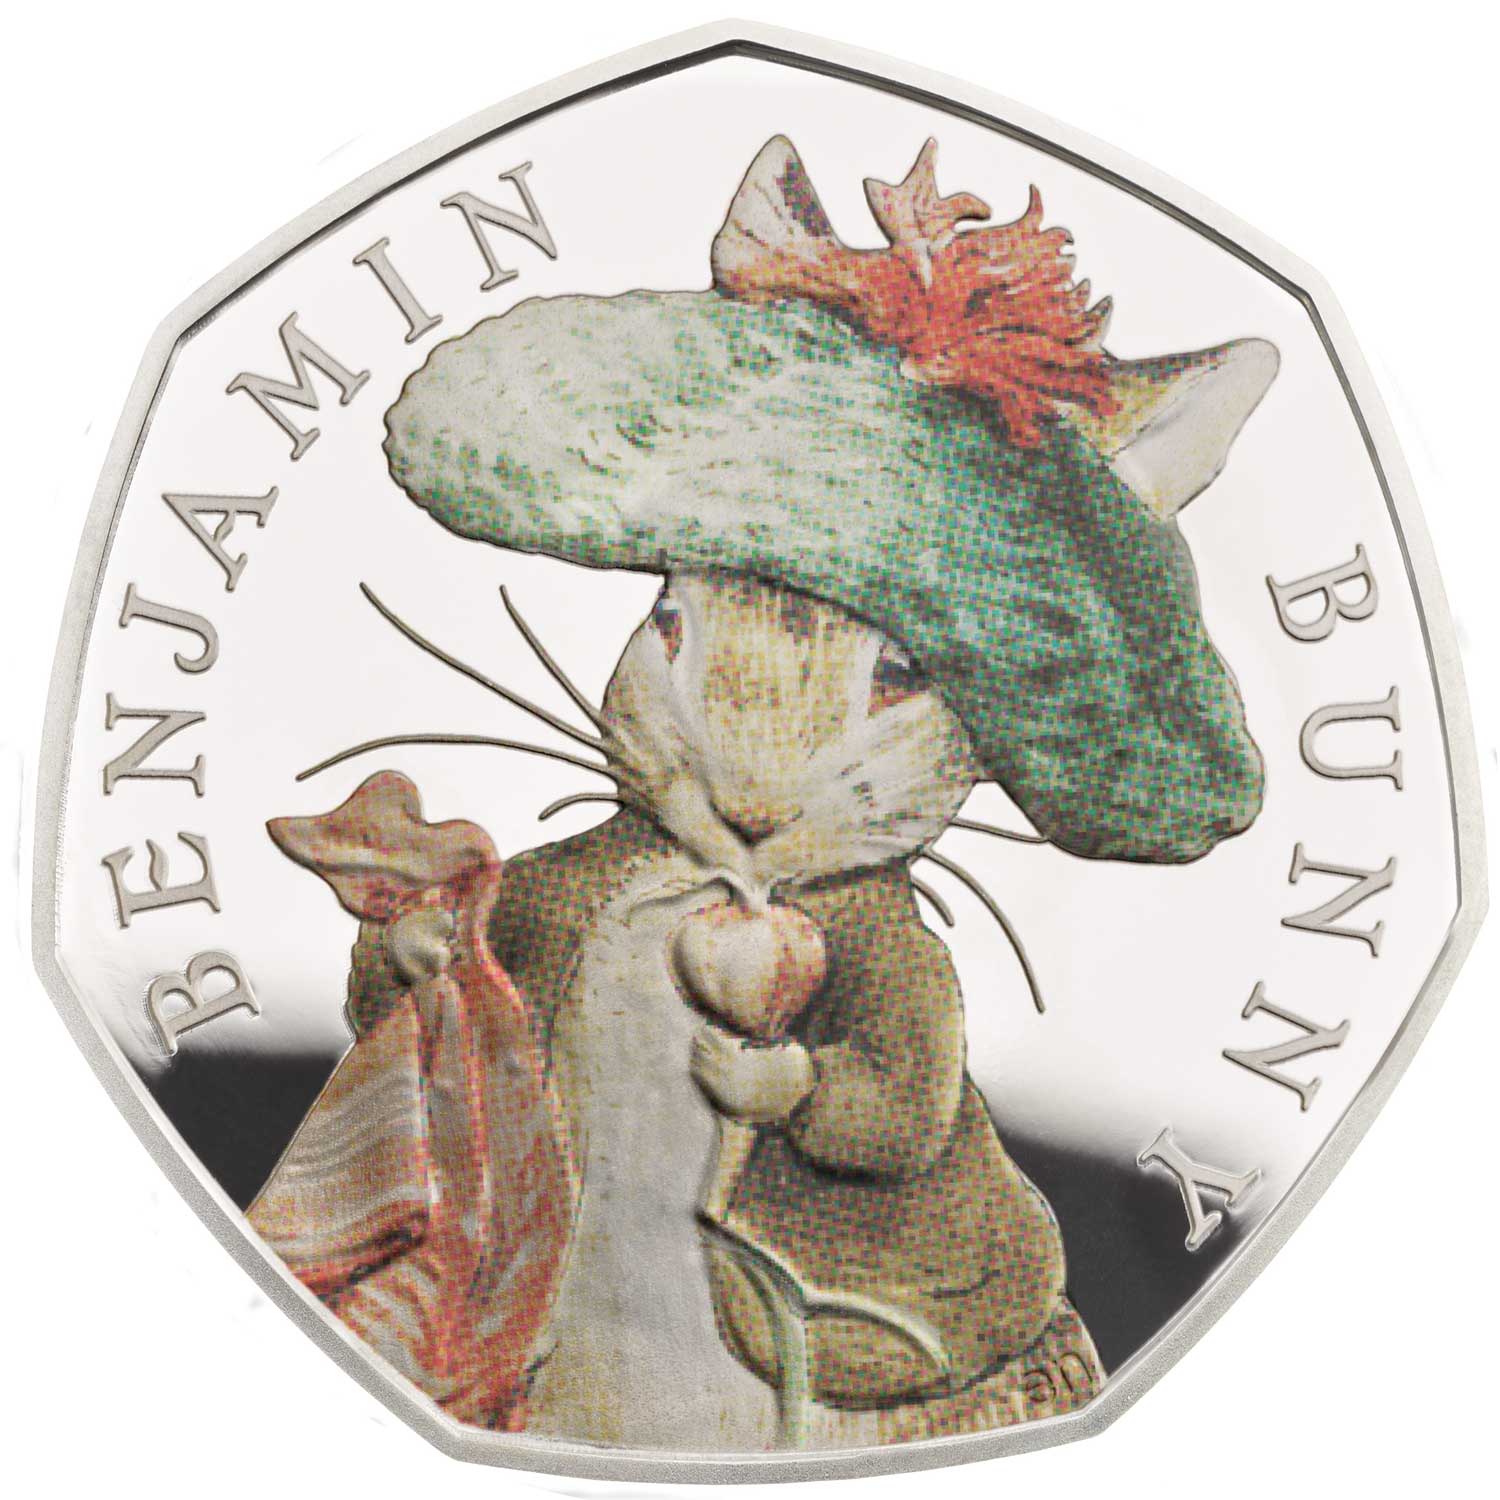 Who wrote the tale of peter rabbit